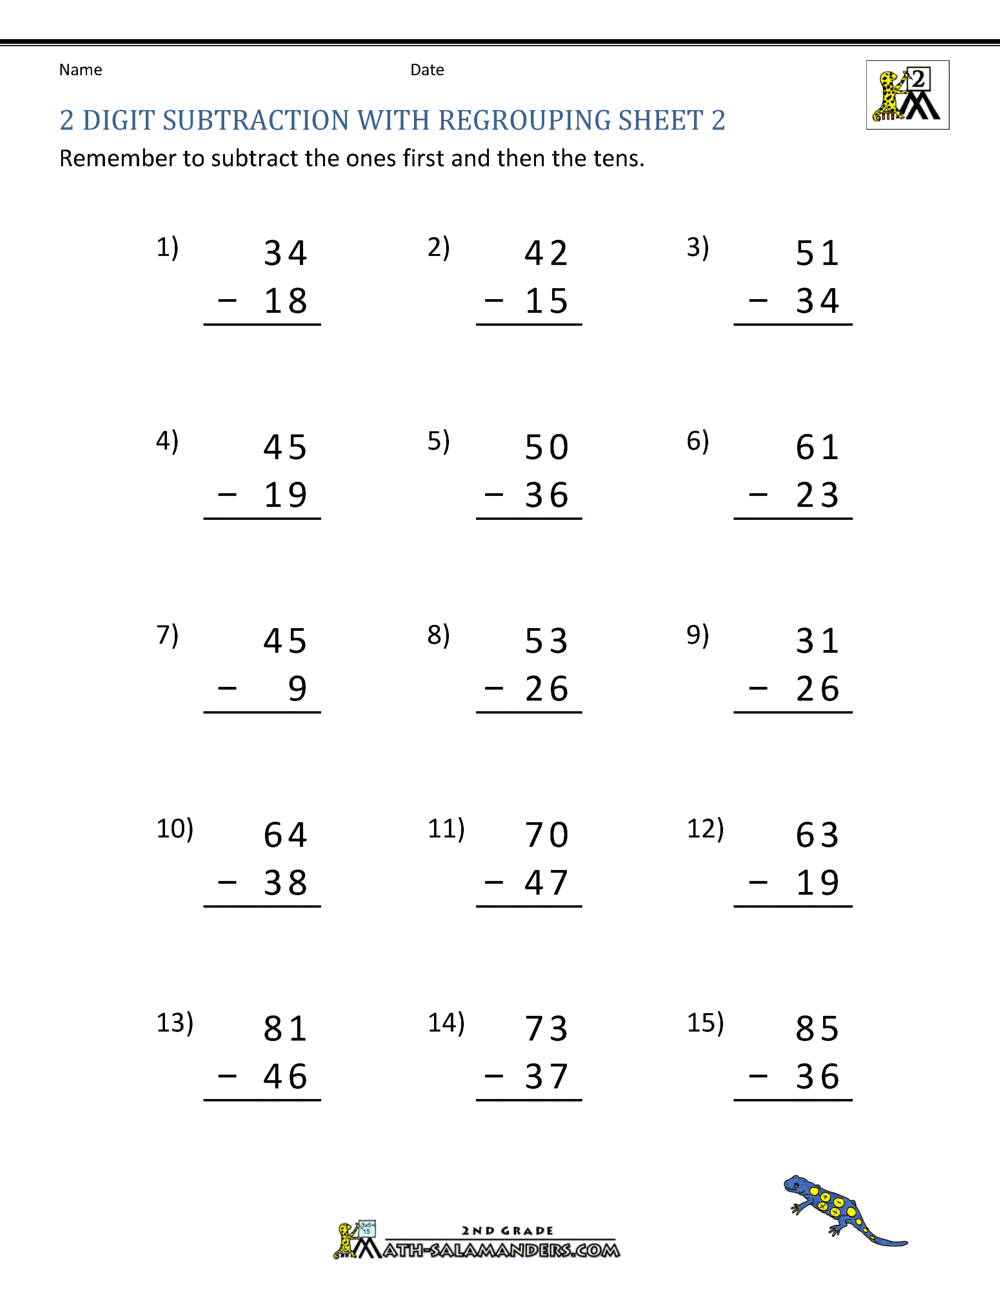 subtraction worksheets regrouping 2 digit